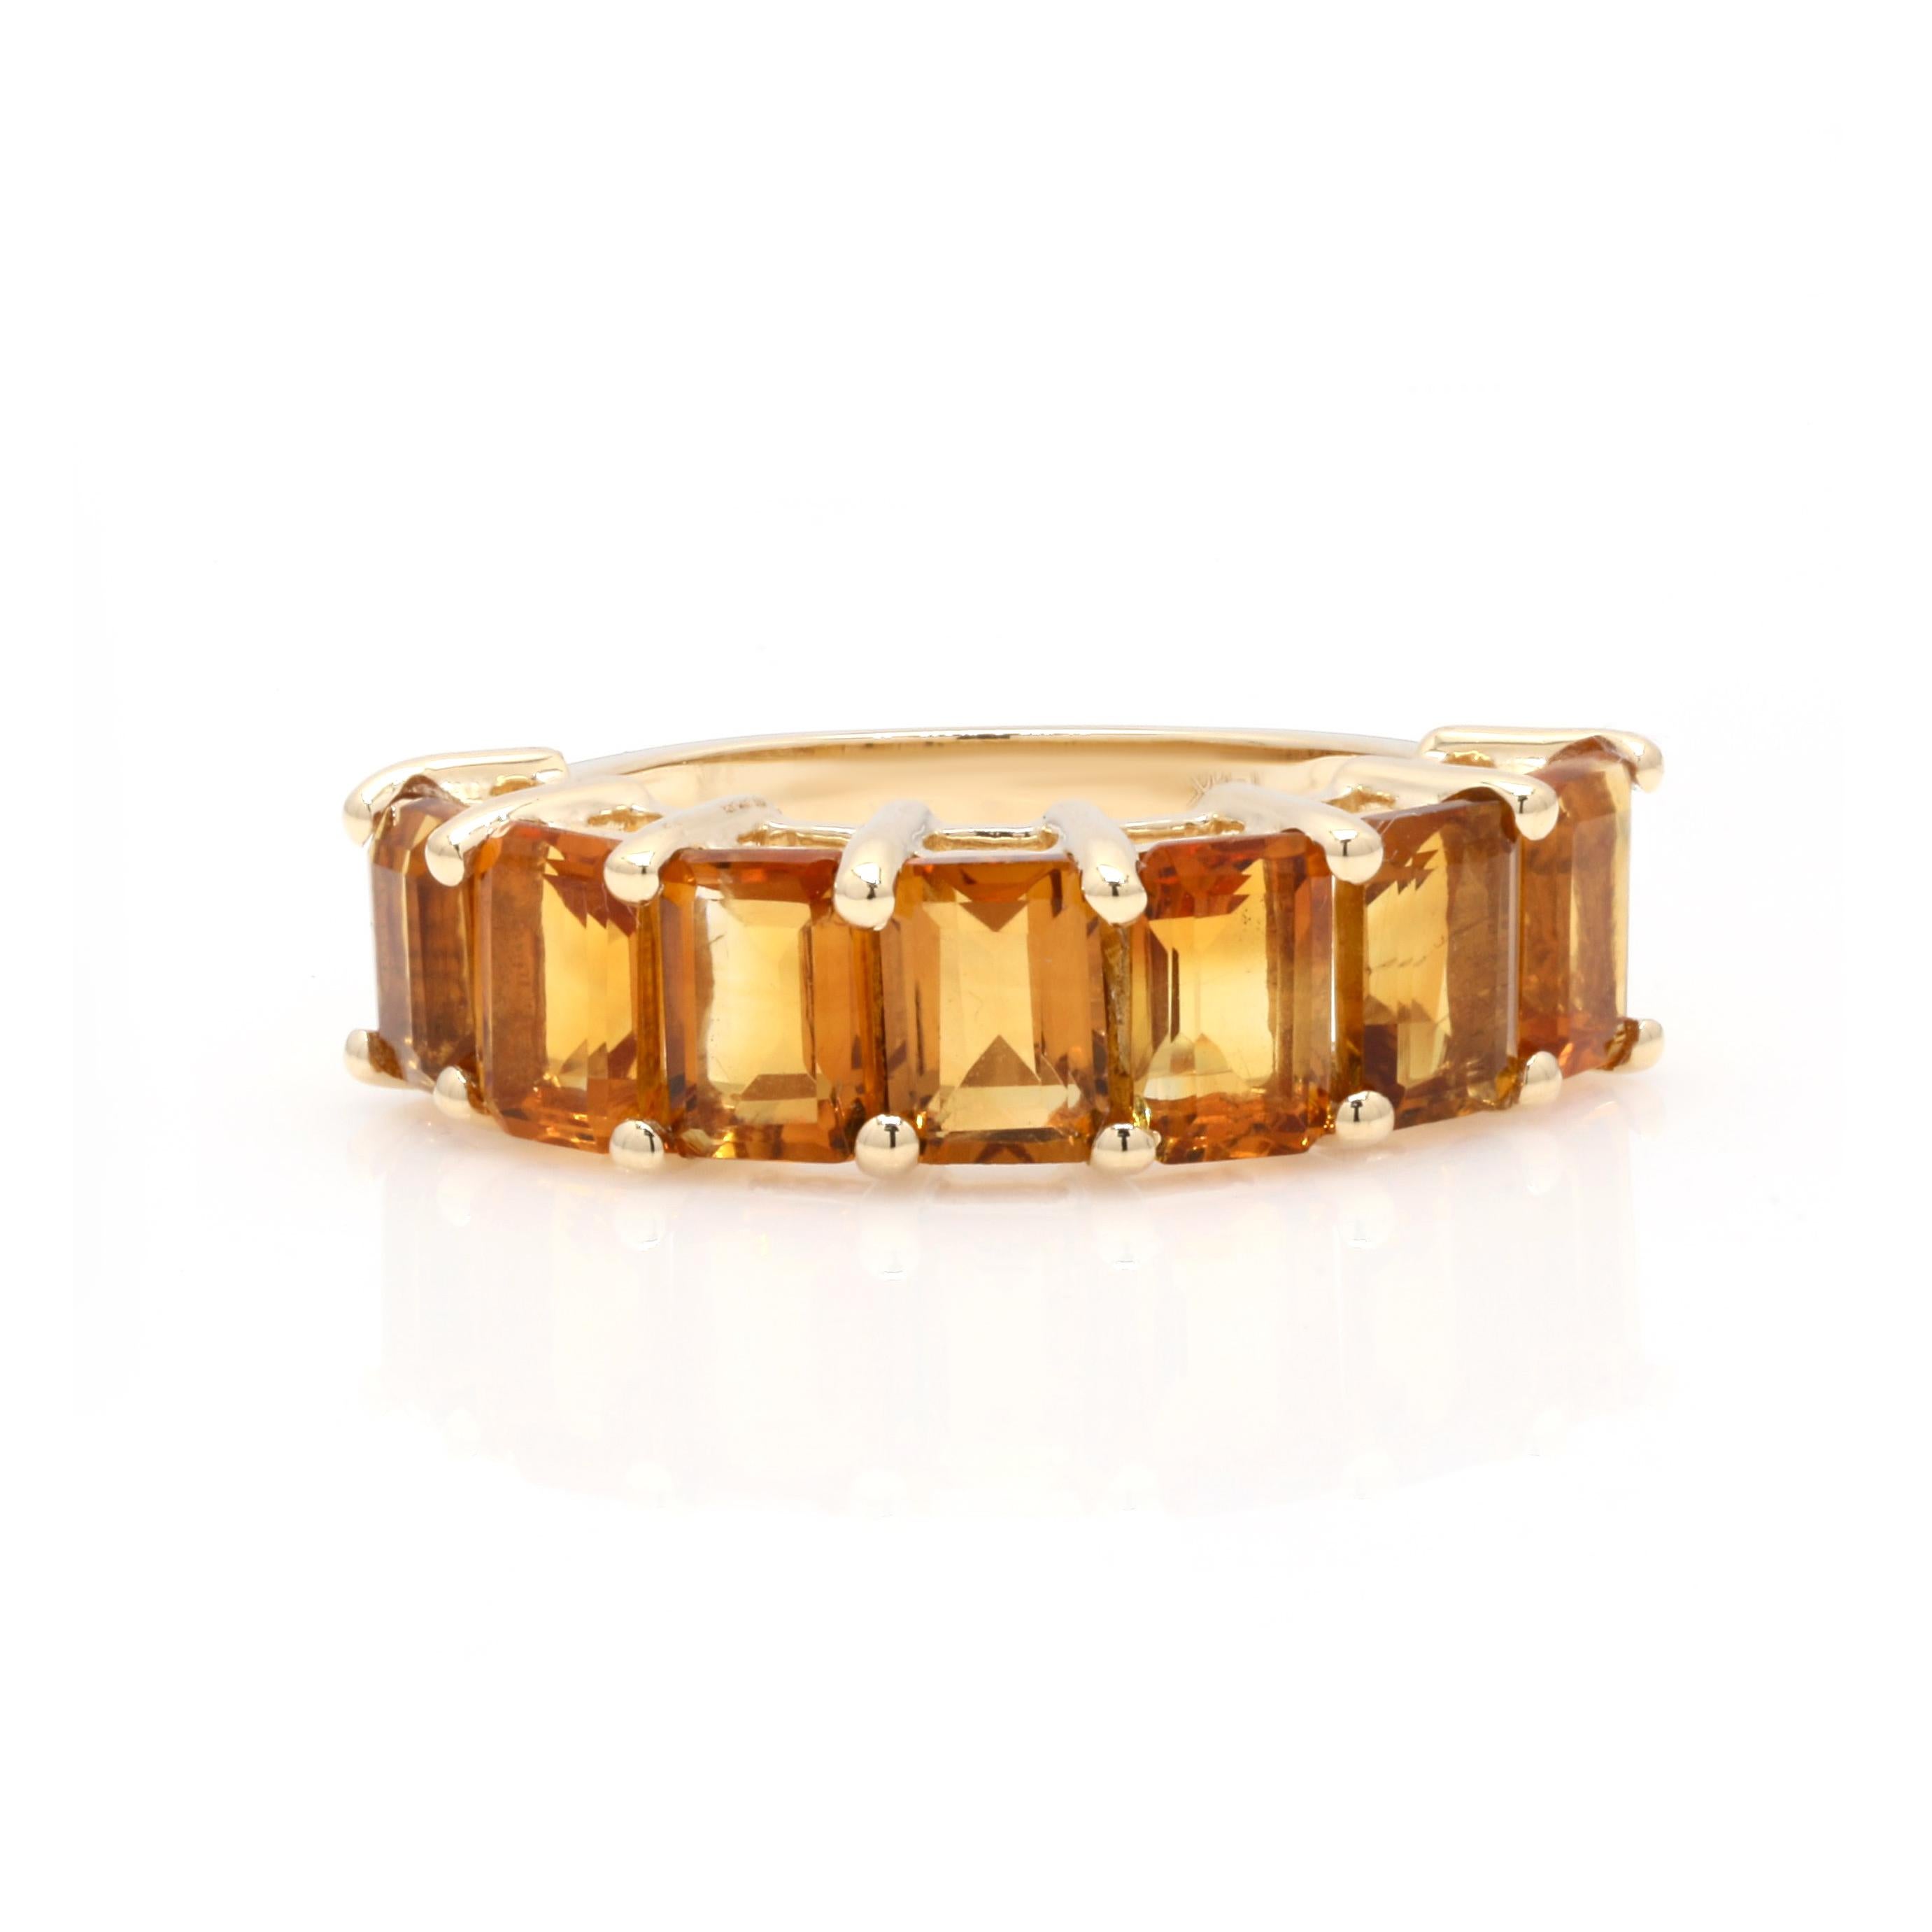 For Sale:  14K Solid Yellow Gold 3.83 Ct Citrine Gemstone Half Eternity Band Ring 4